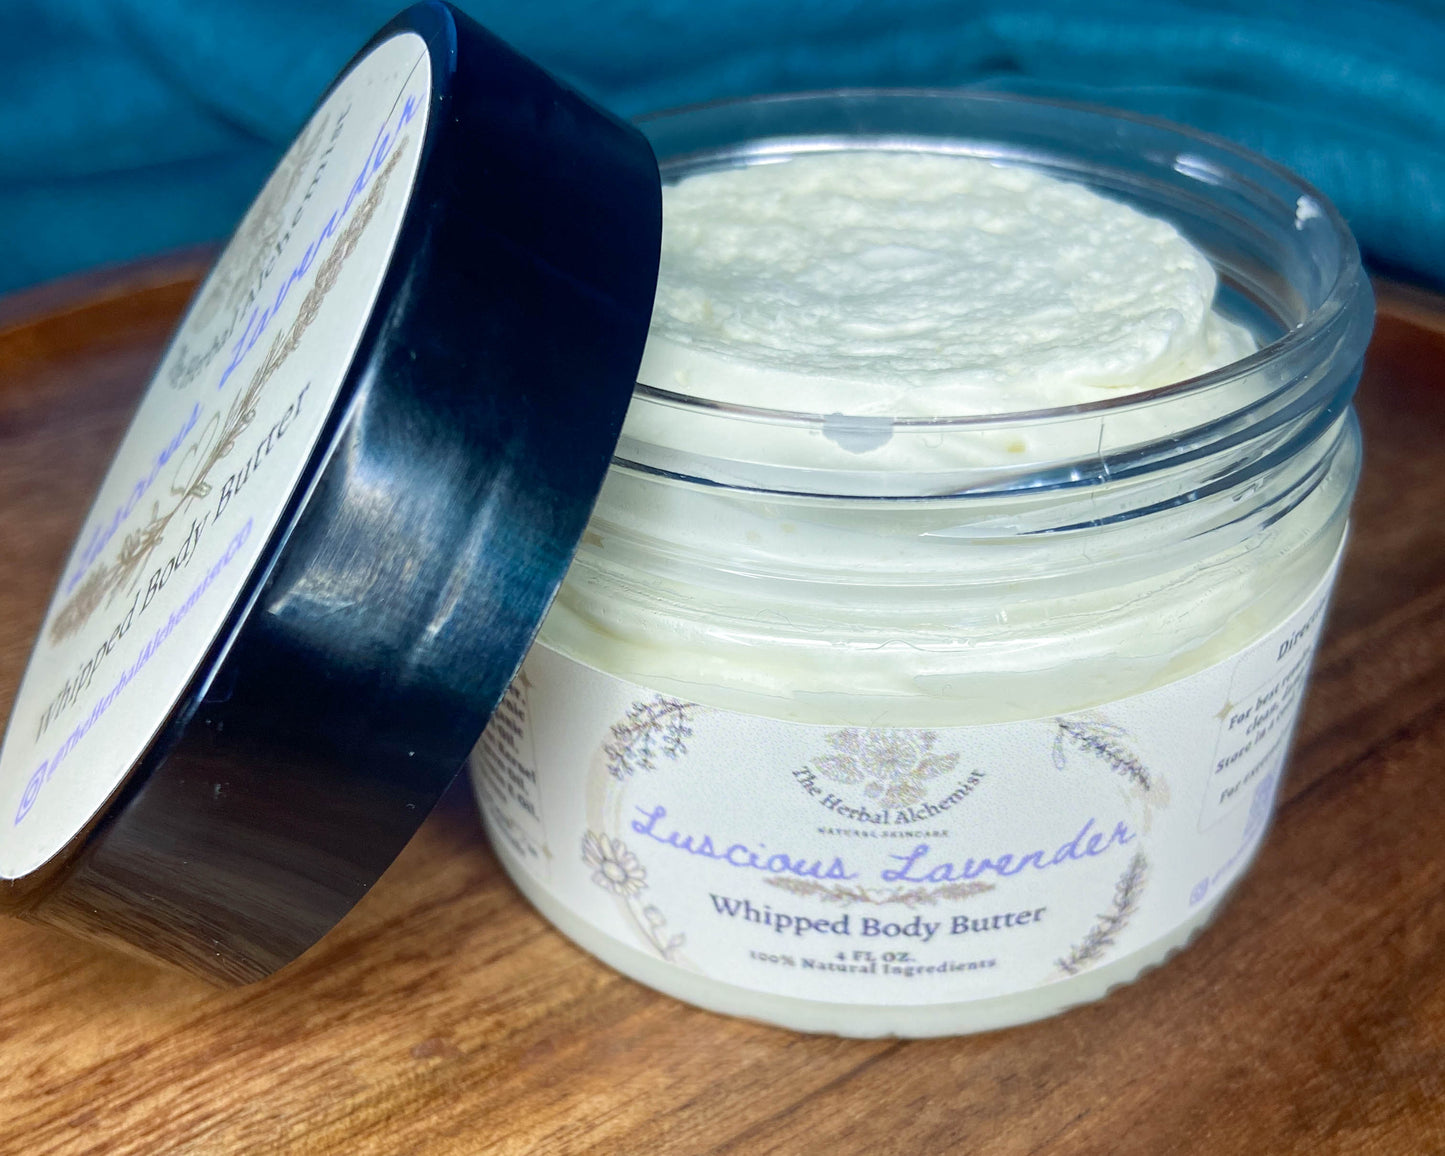 Luscious Lavender Whipped Body Butter - The Herbal Alchemist